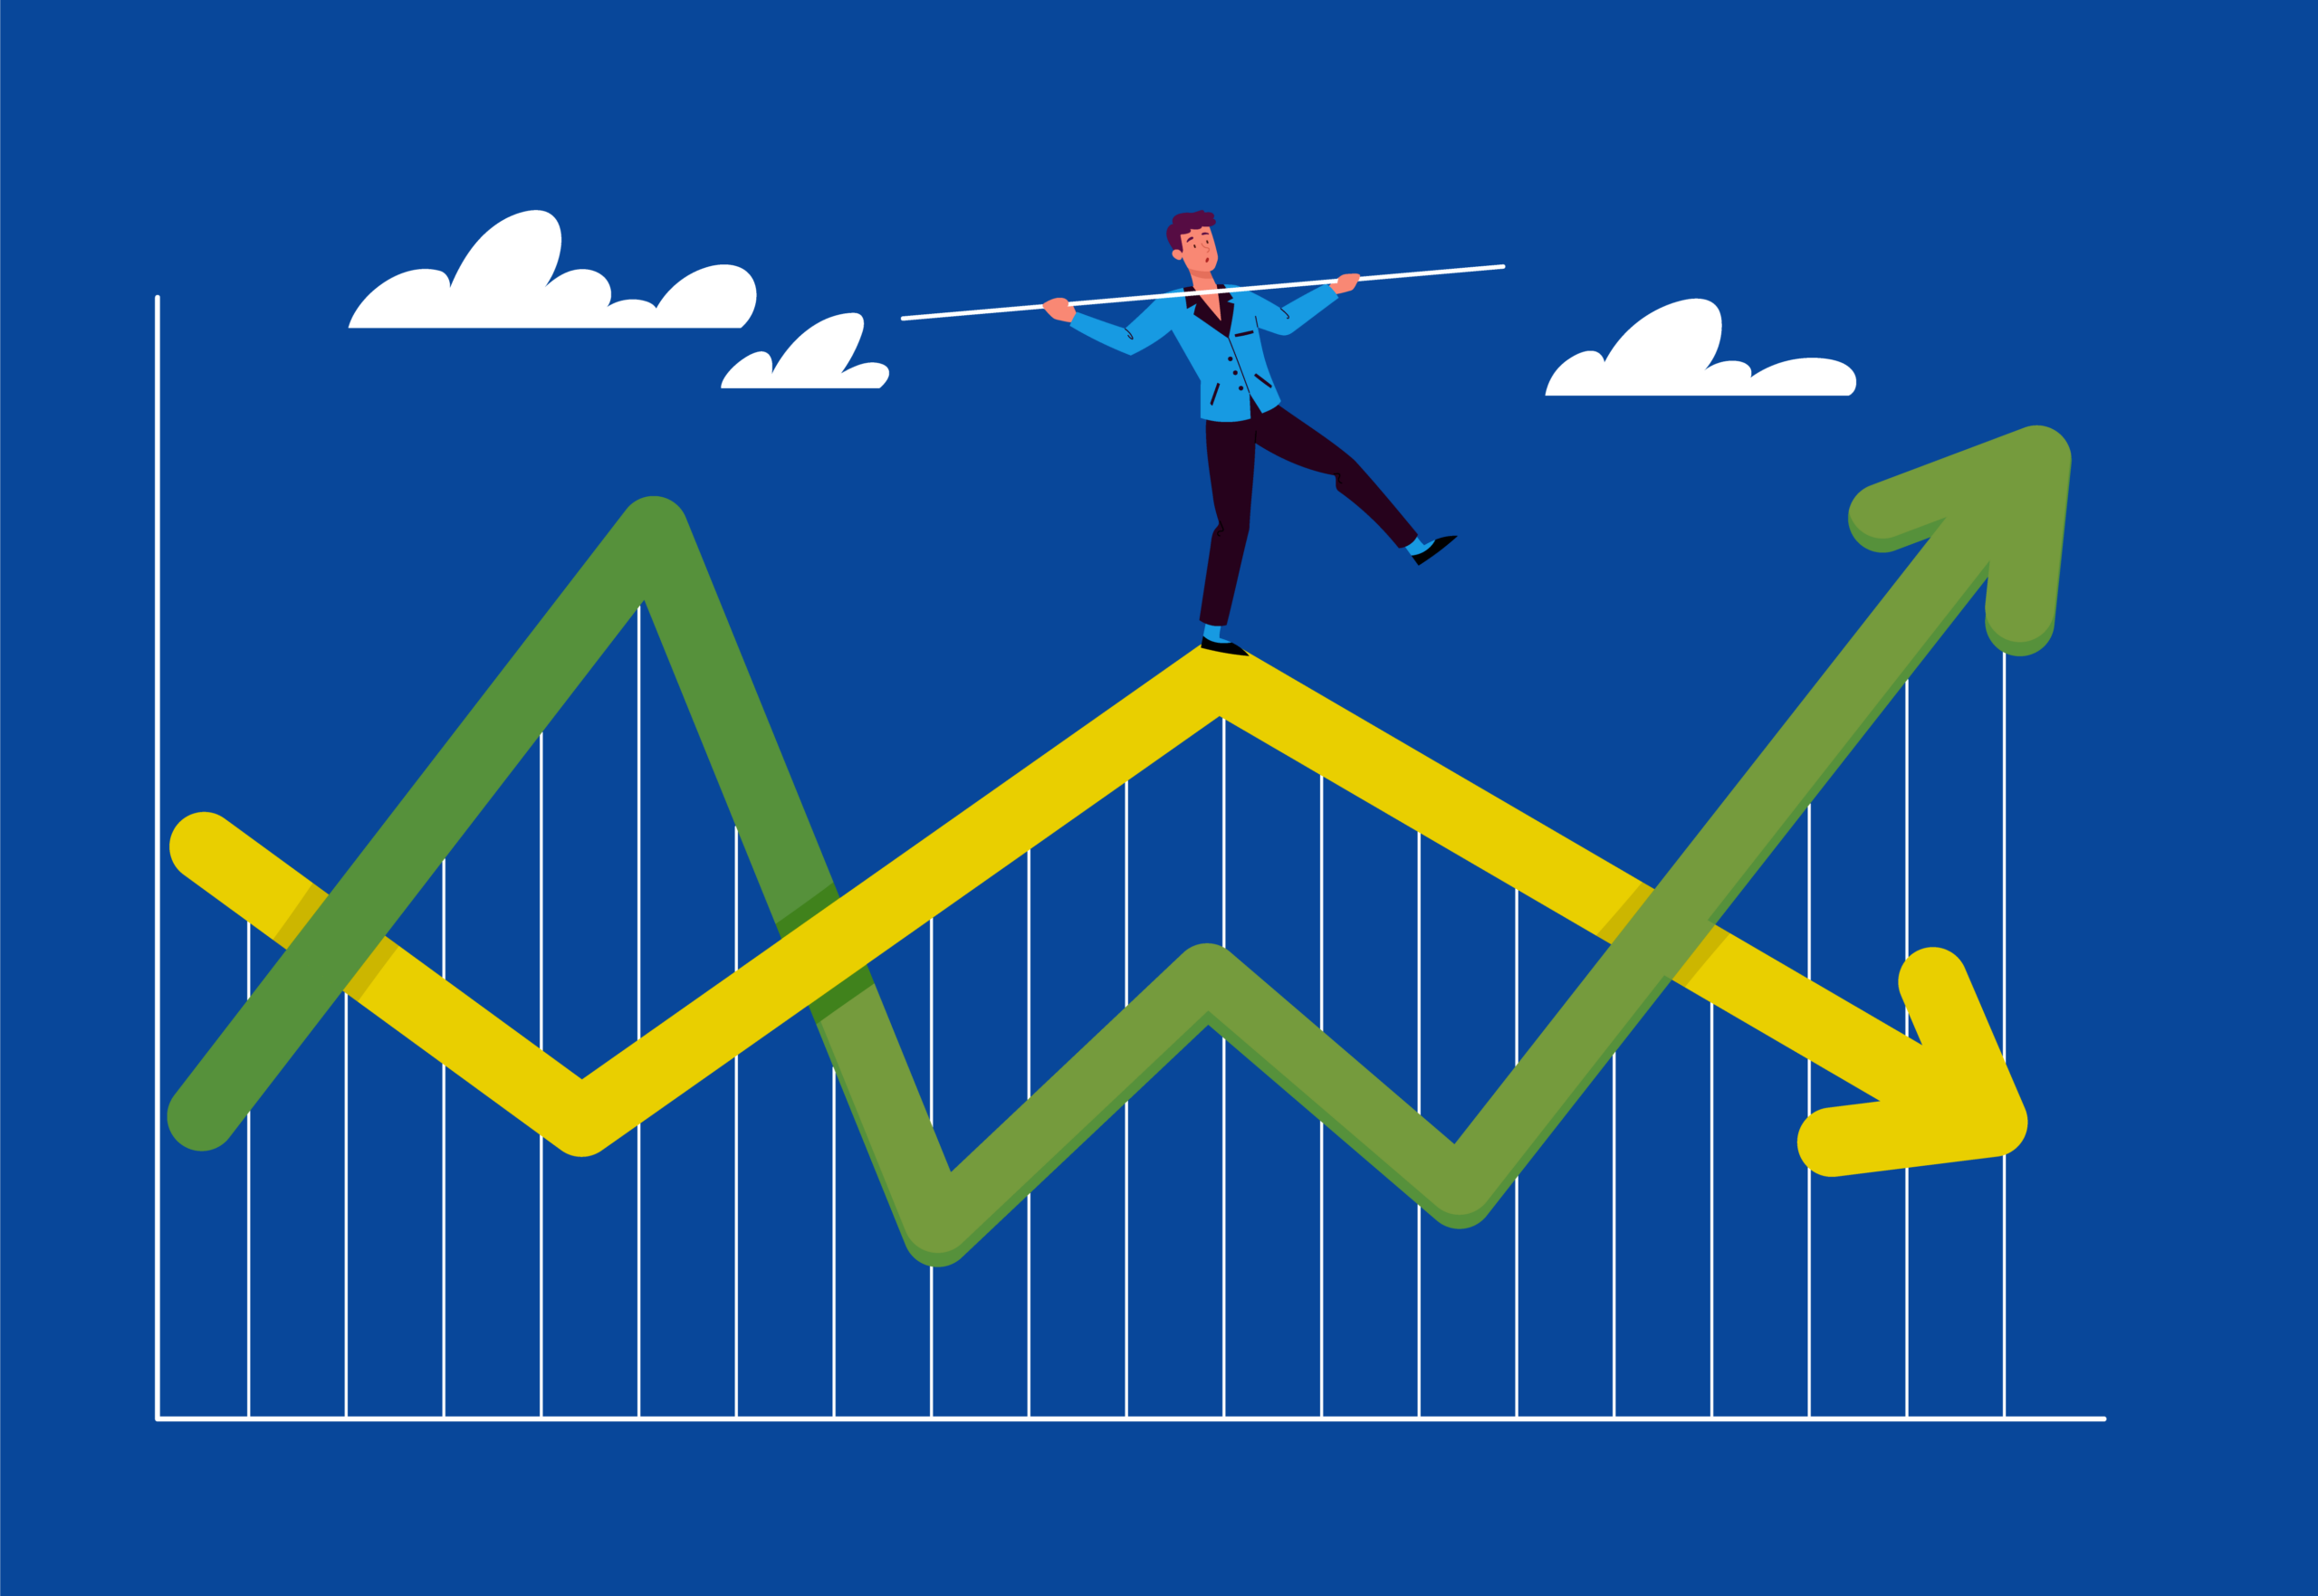 Man walking a tightrope on top of a financial graph with arrows going up and down